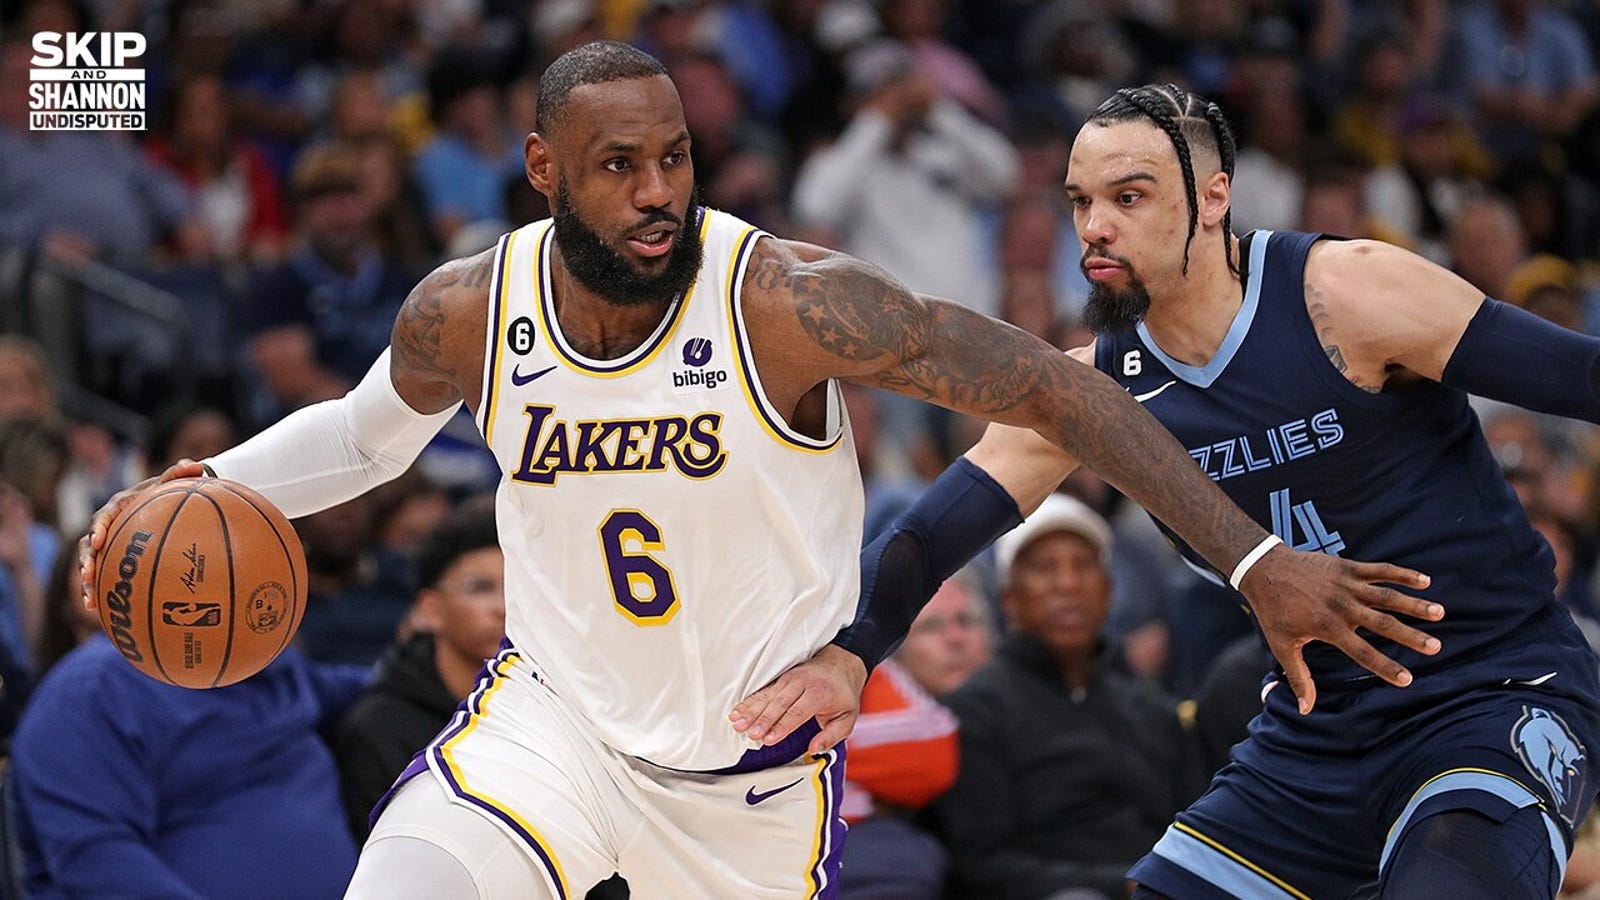 Lakers steal Game 1 against Grizzlies;  Austin Reaves scores 20+ points